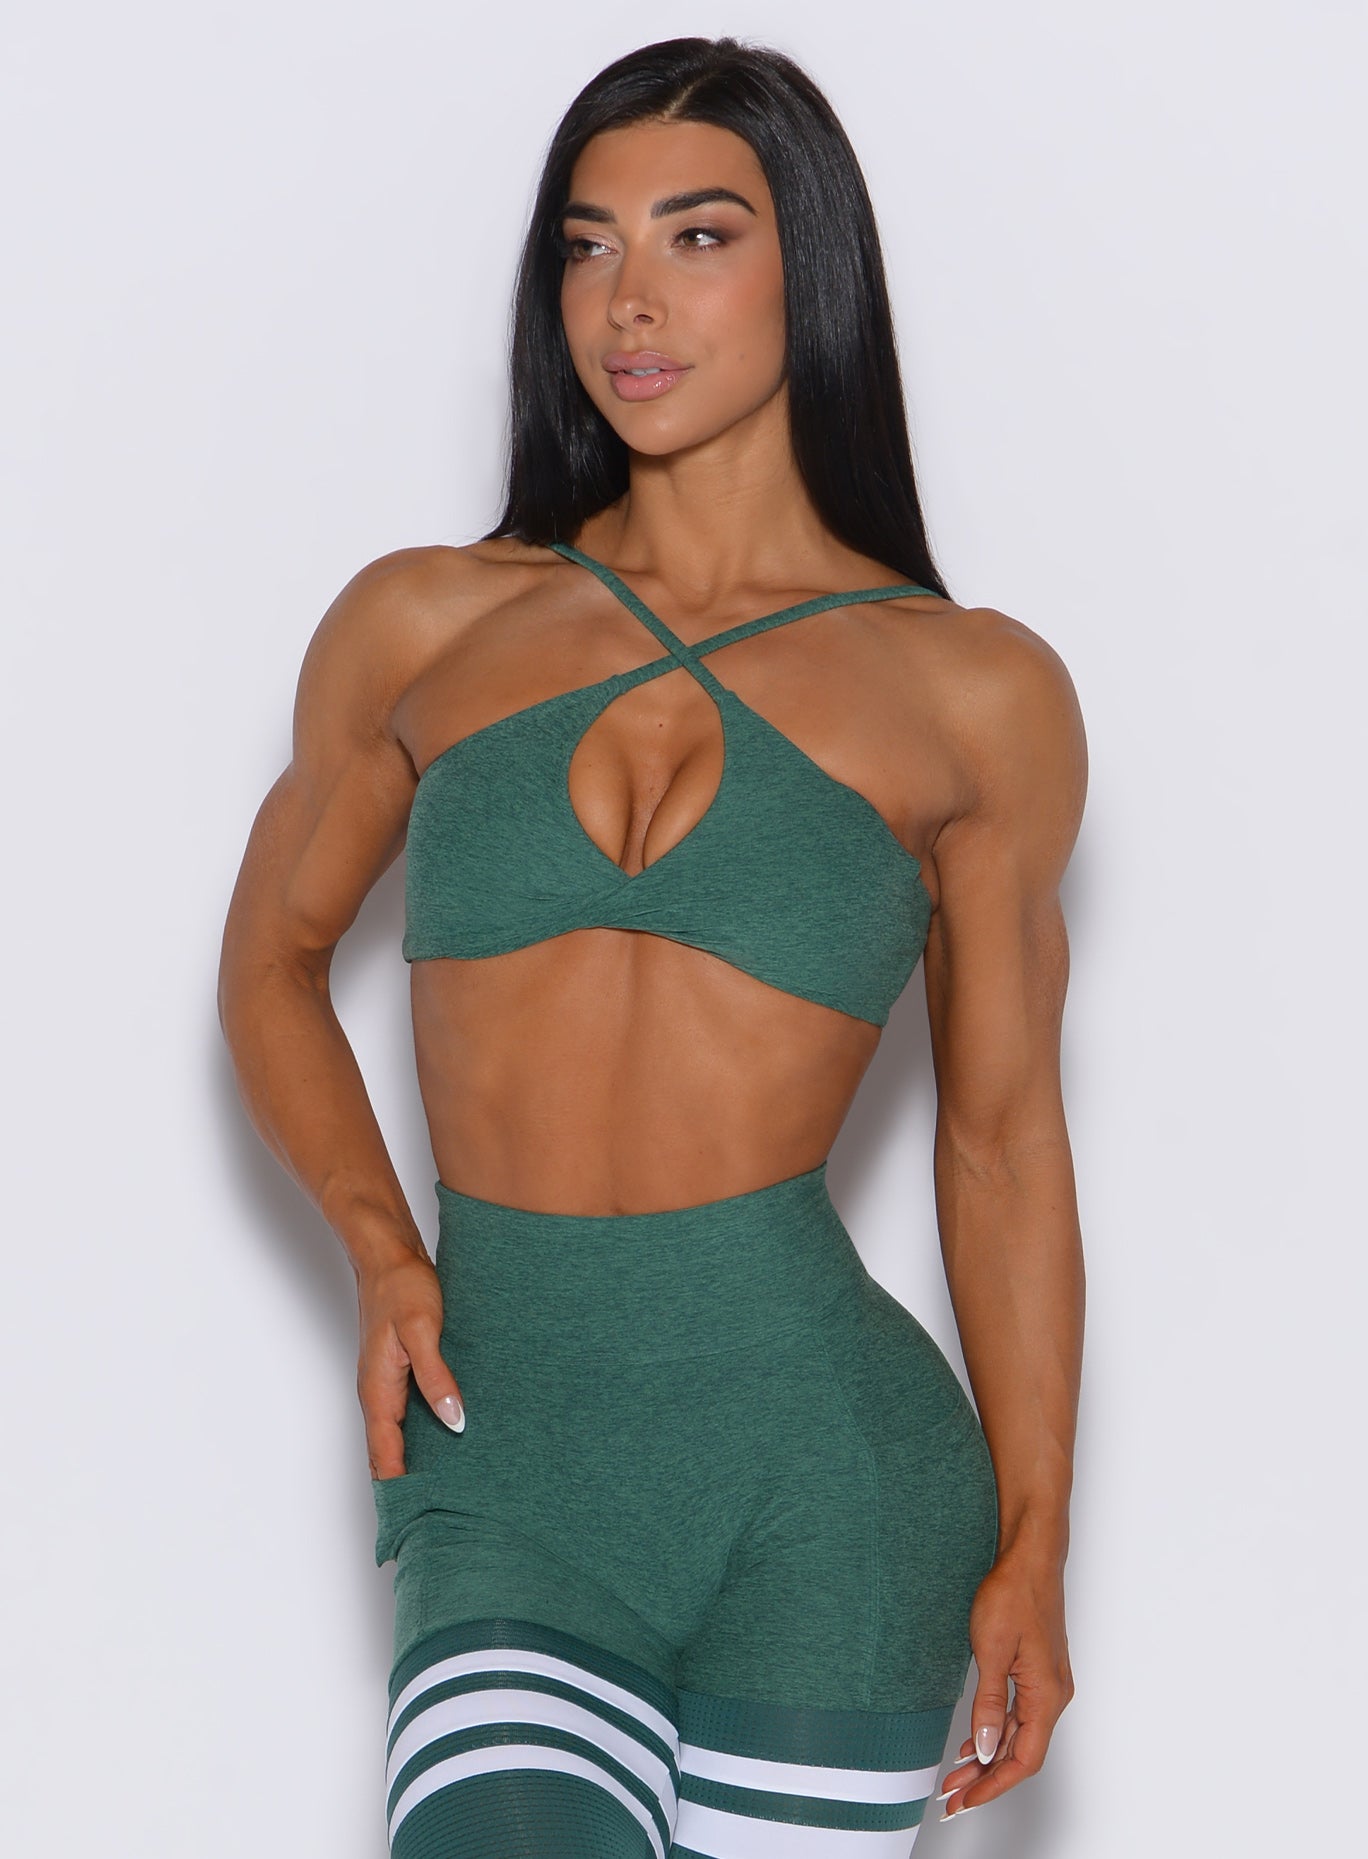 Front profile view of a model wearing our twist mini bra in emerald green color along with a matching thigh high leggings